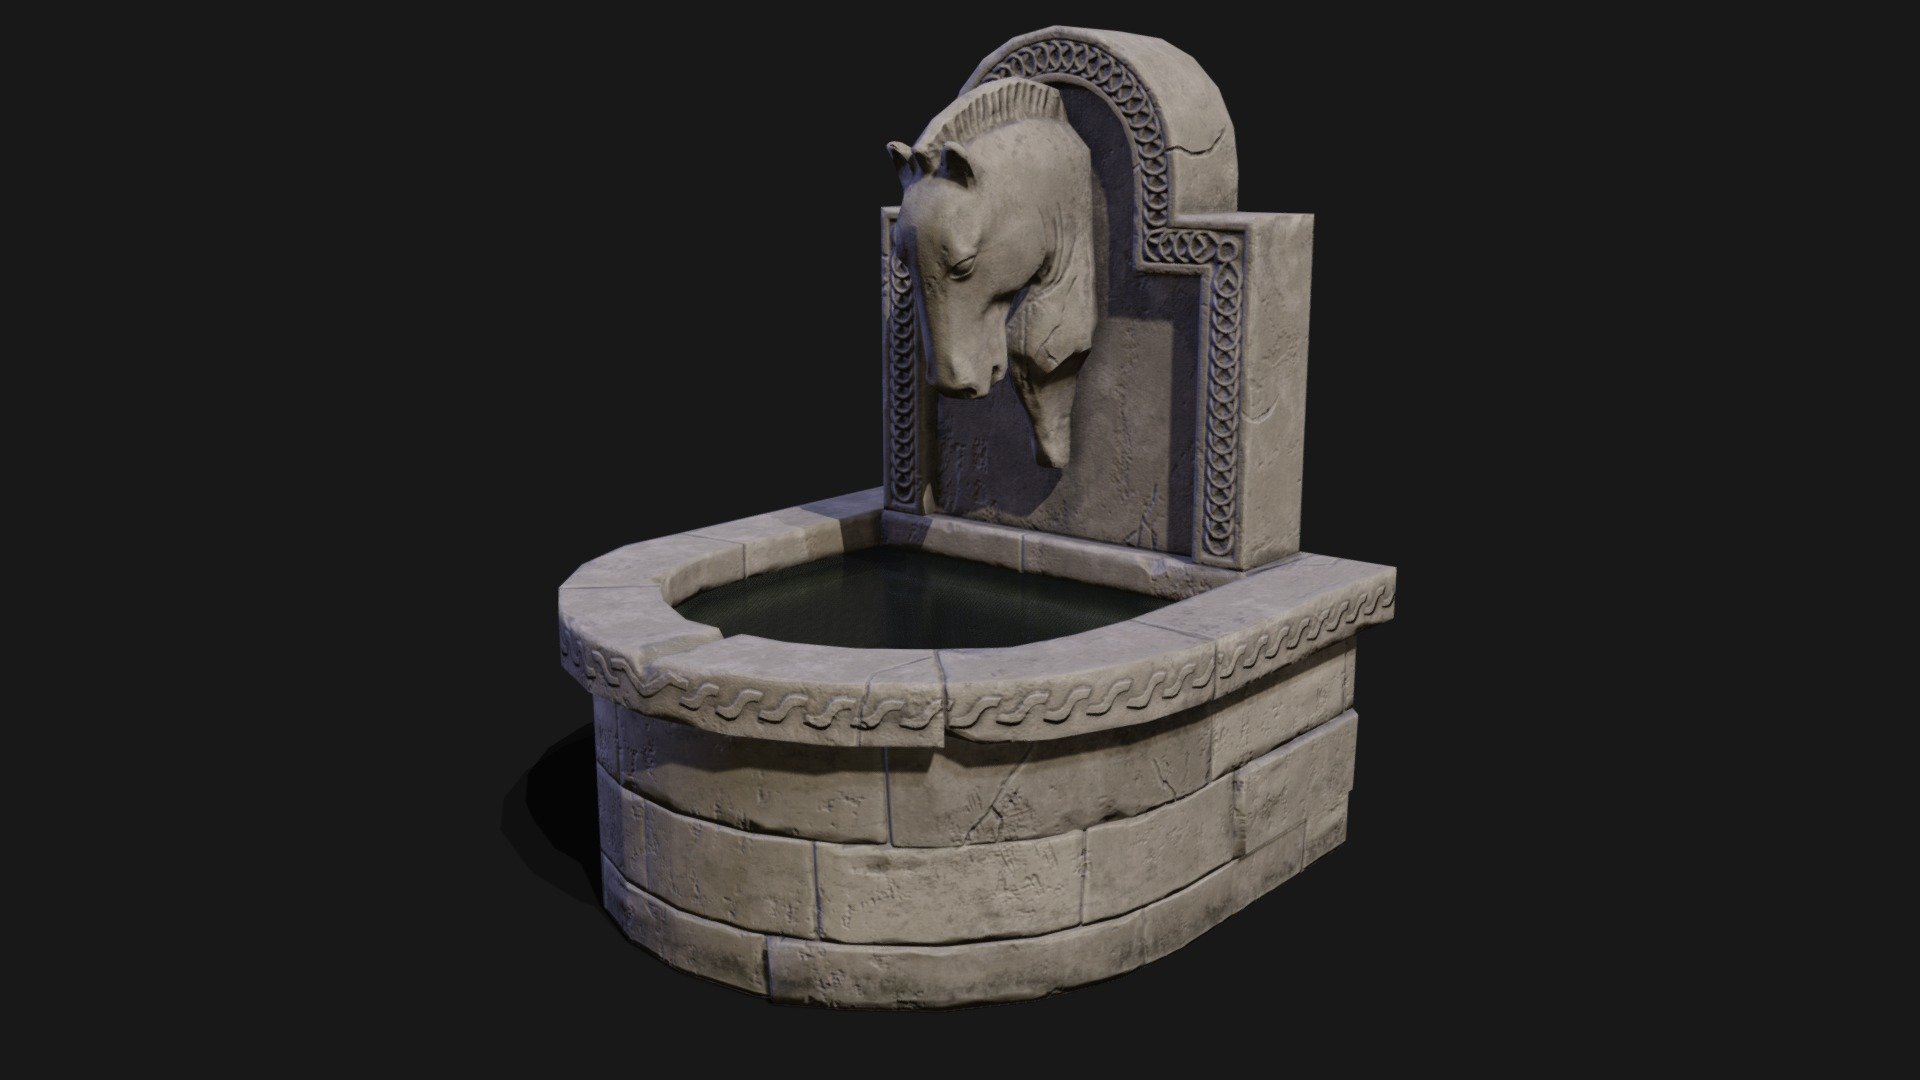 model made in spare time for practice
based on well from Edoras - Well - 3D model by lukaszukszymon 3d model